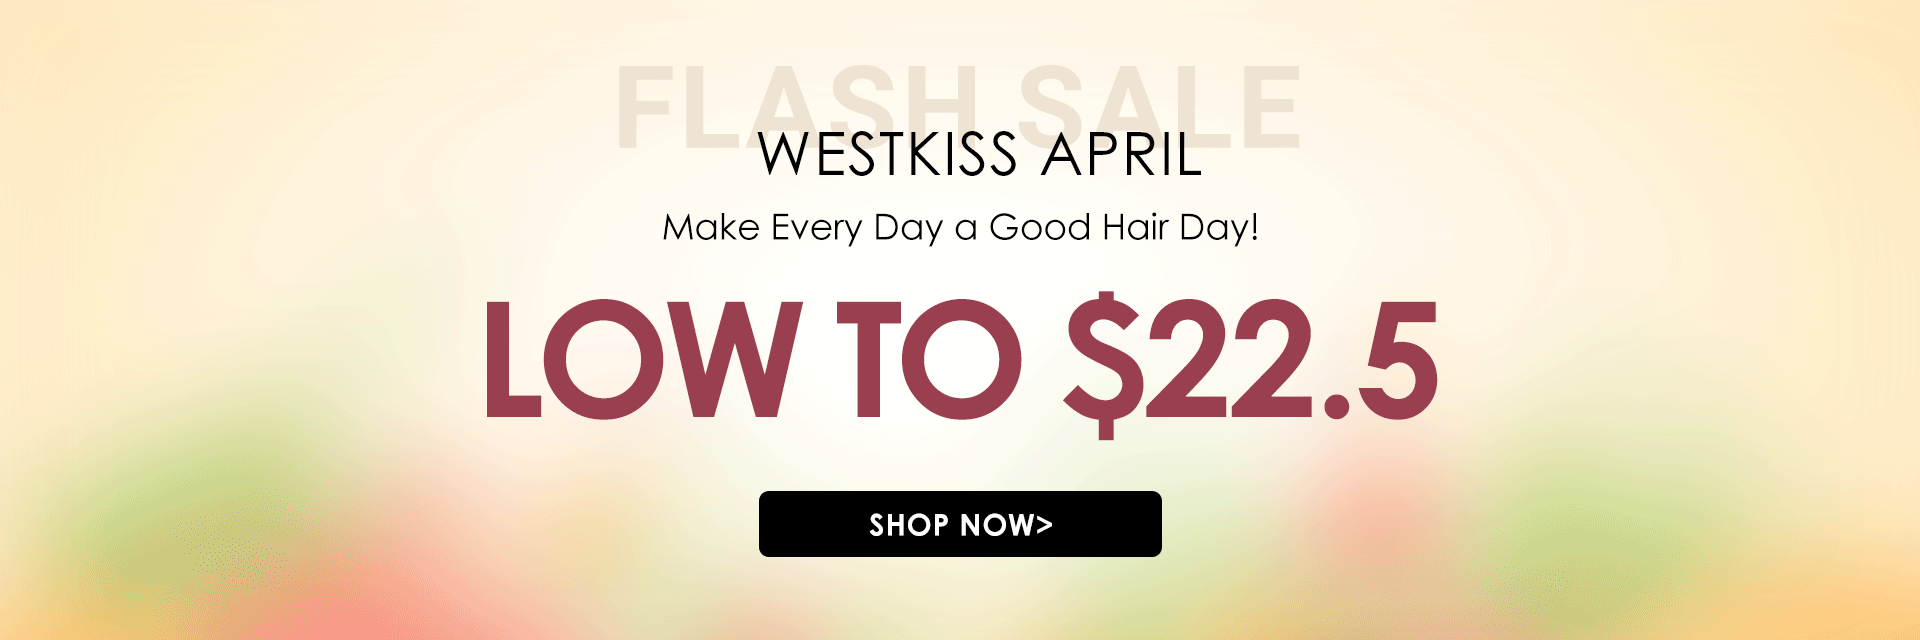 West kiss hair store offers sale discounted wigs on sale